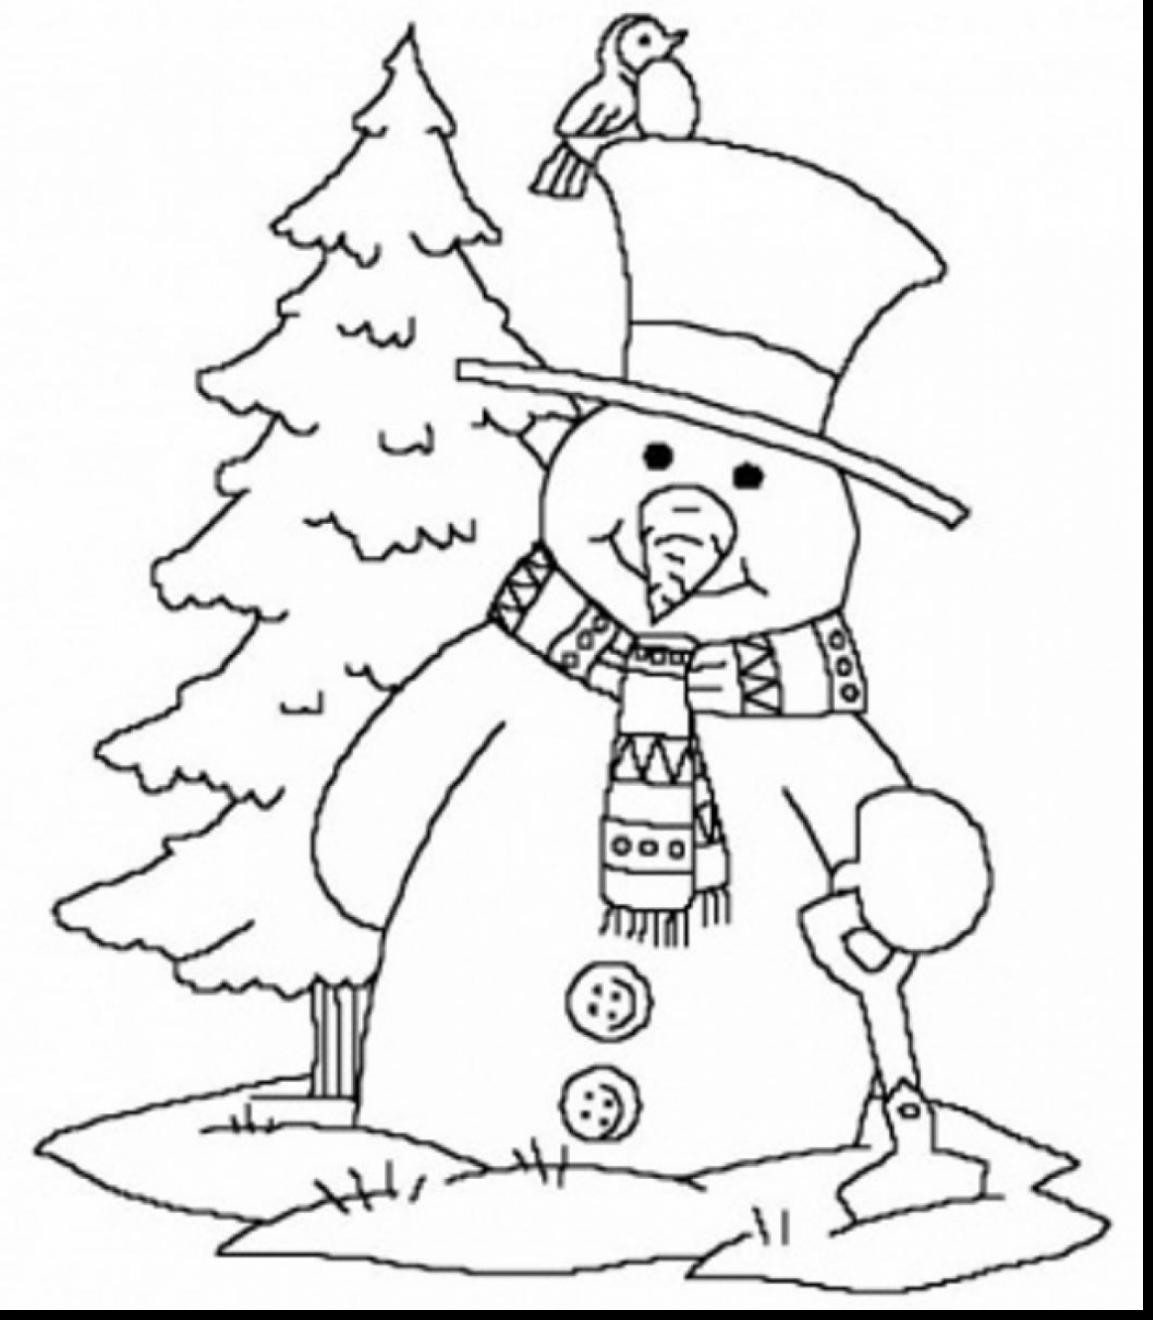 view-winter-wonderland-winter-coloring-pages-for-adults-pics-colorist